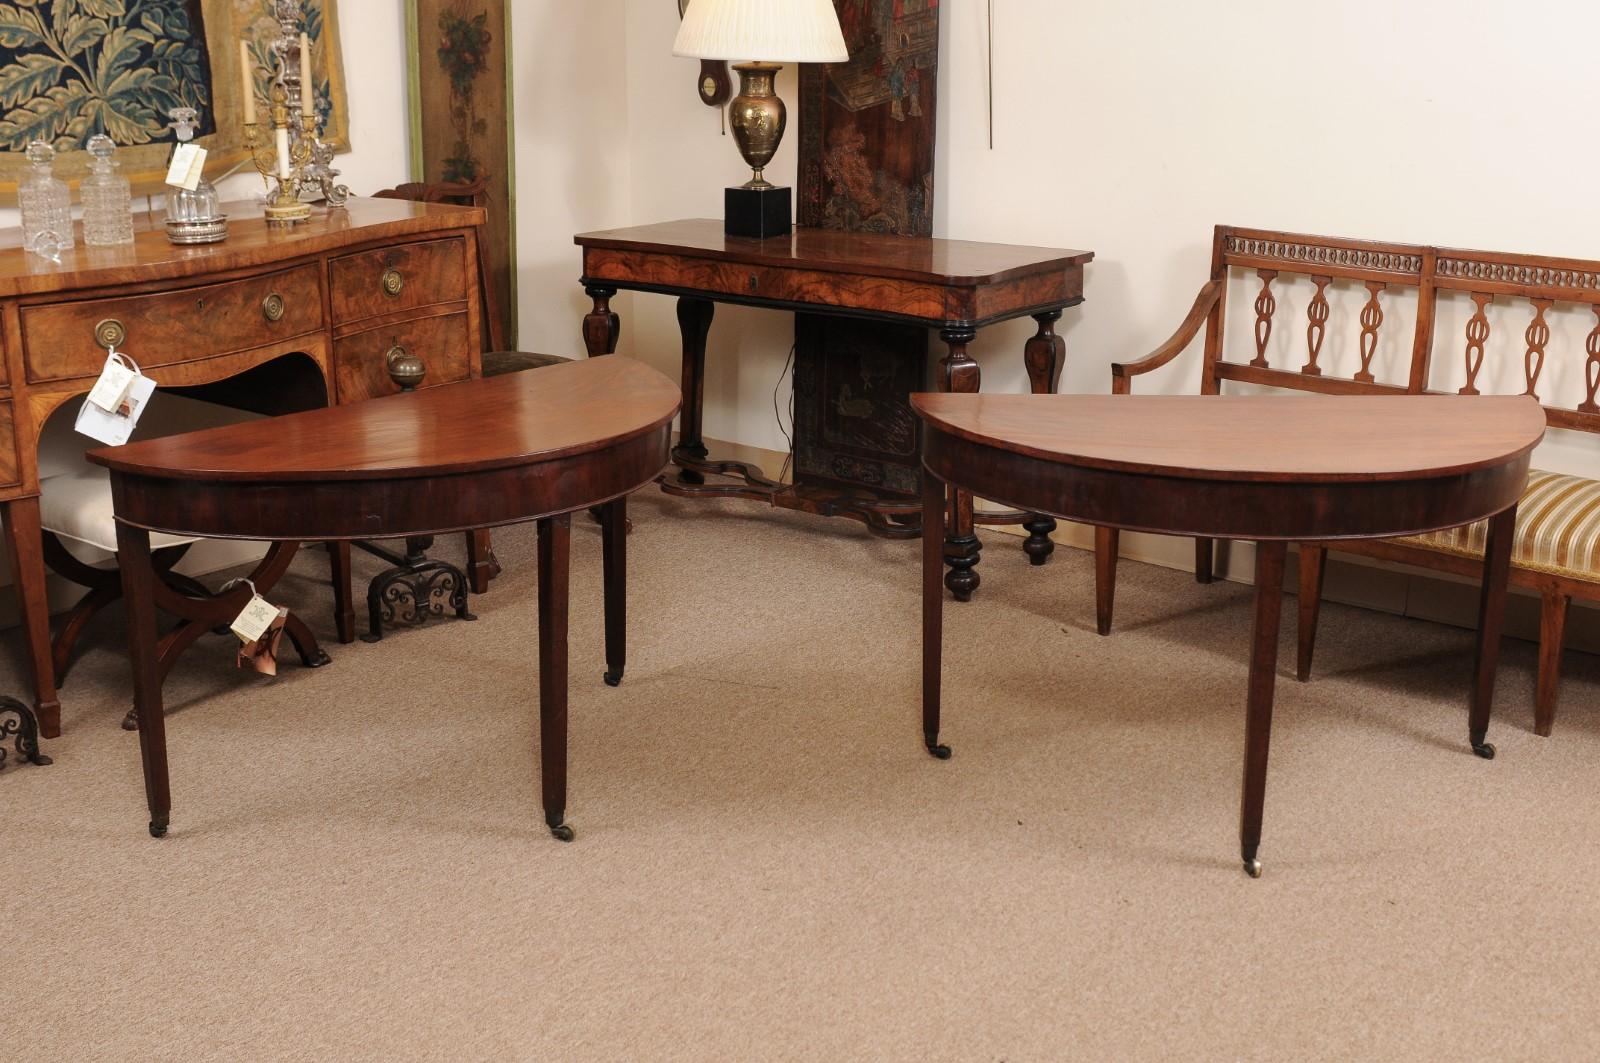 The pair of George III English mahogany demilune console tables with tapered legs and brass caster feet. 

 